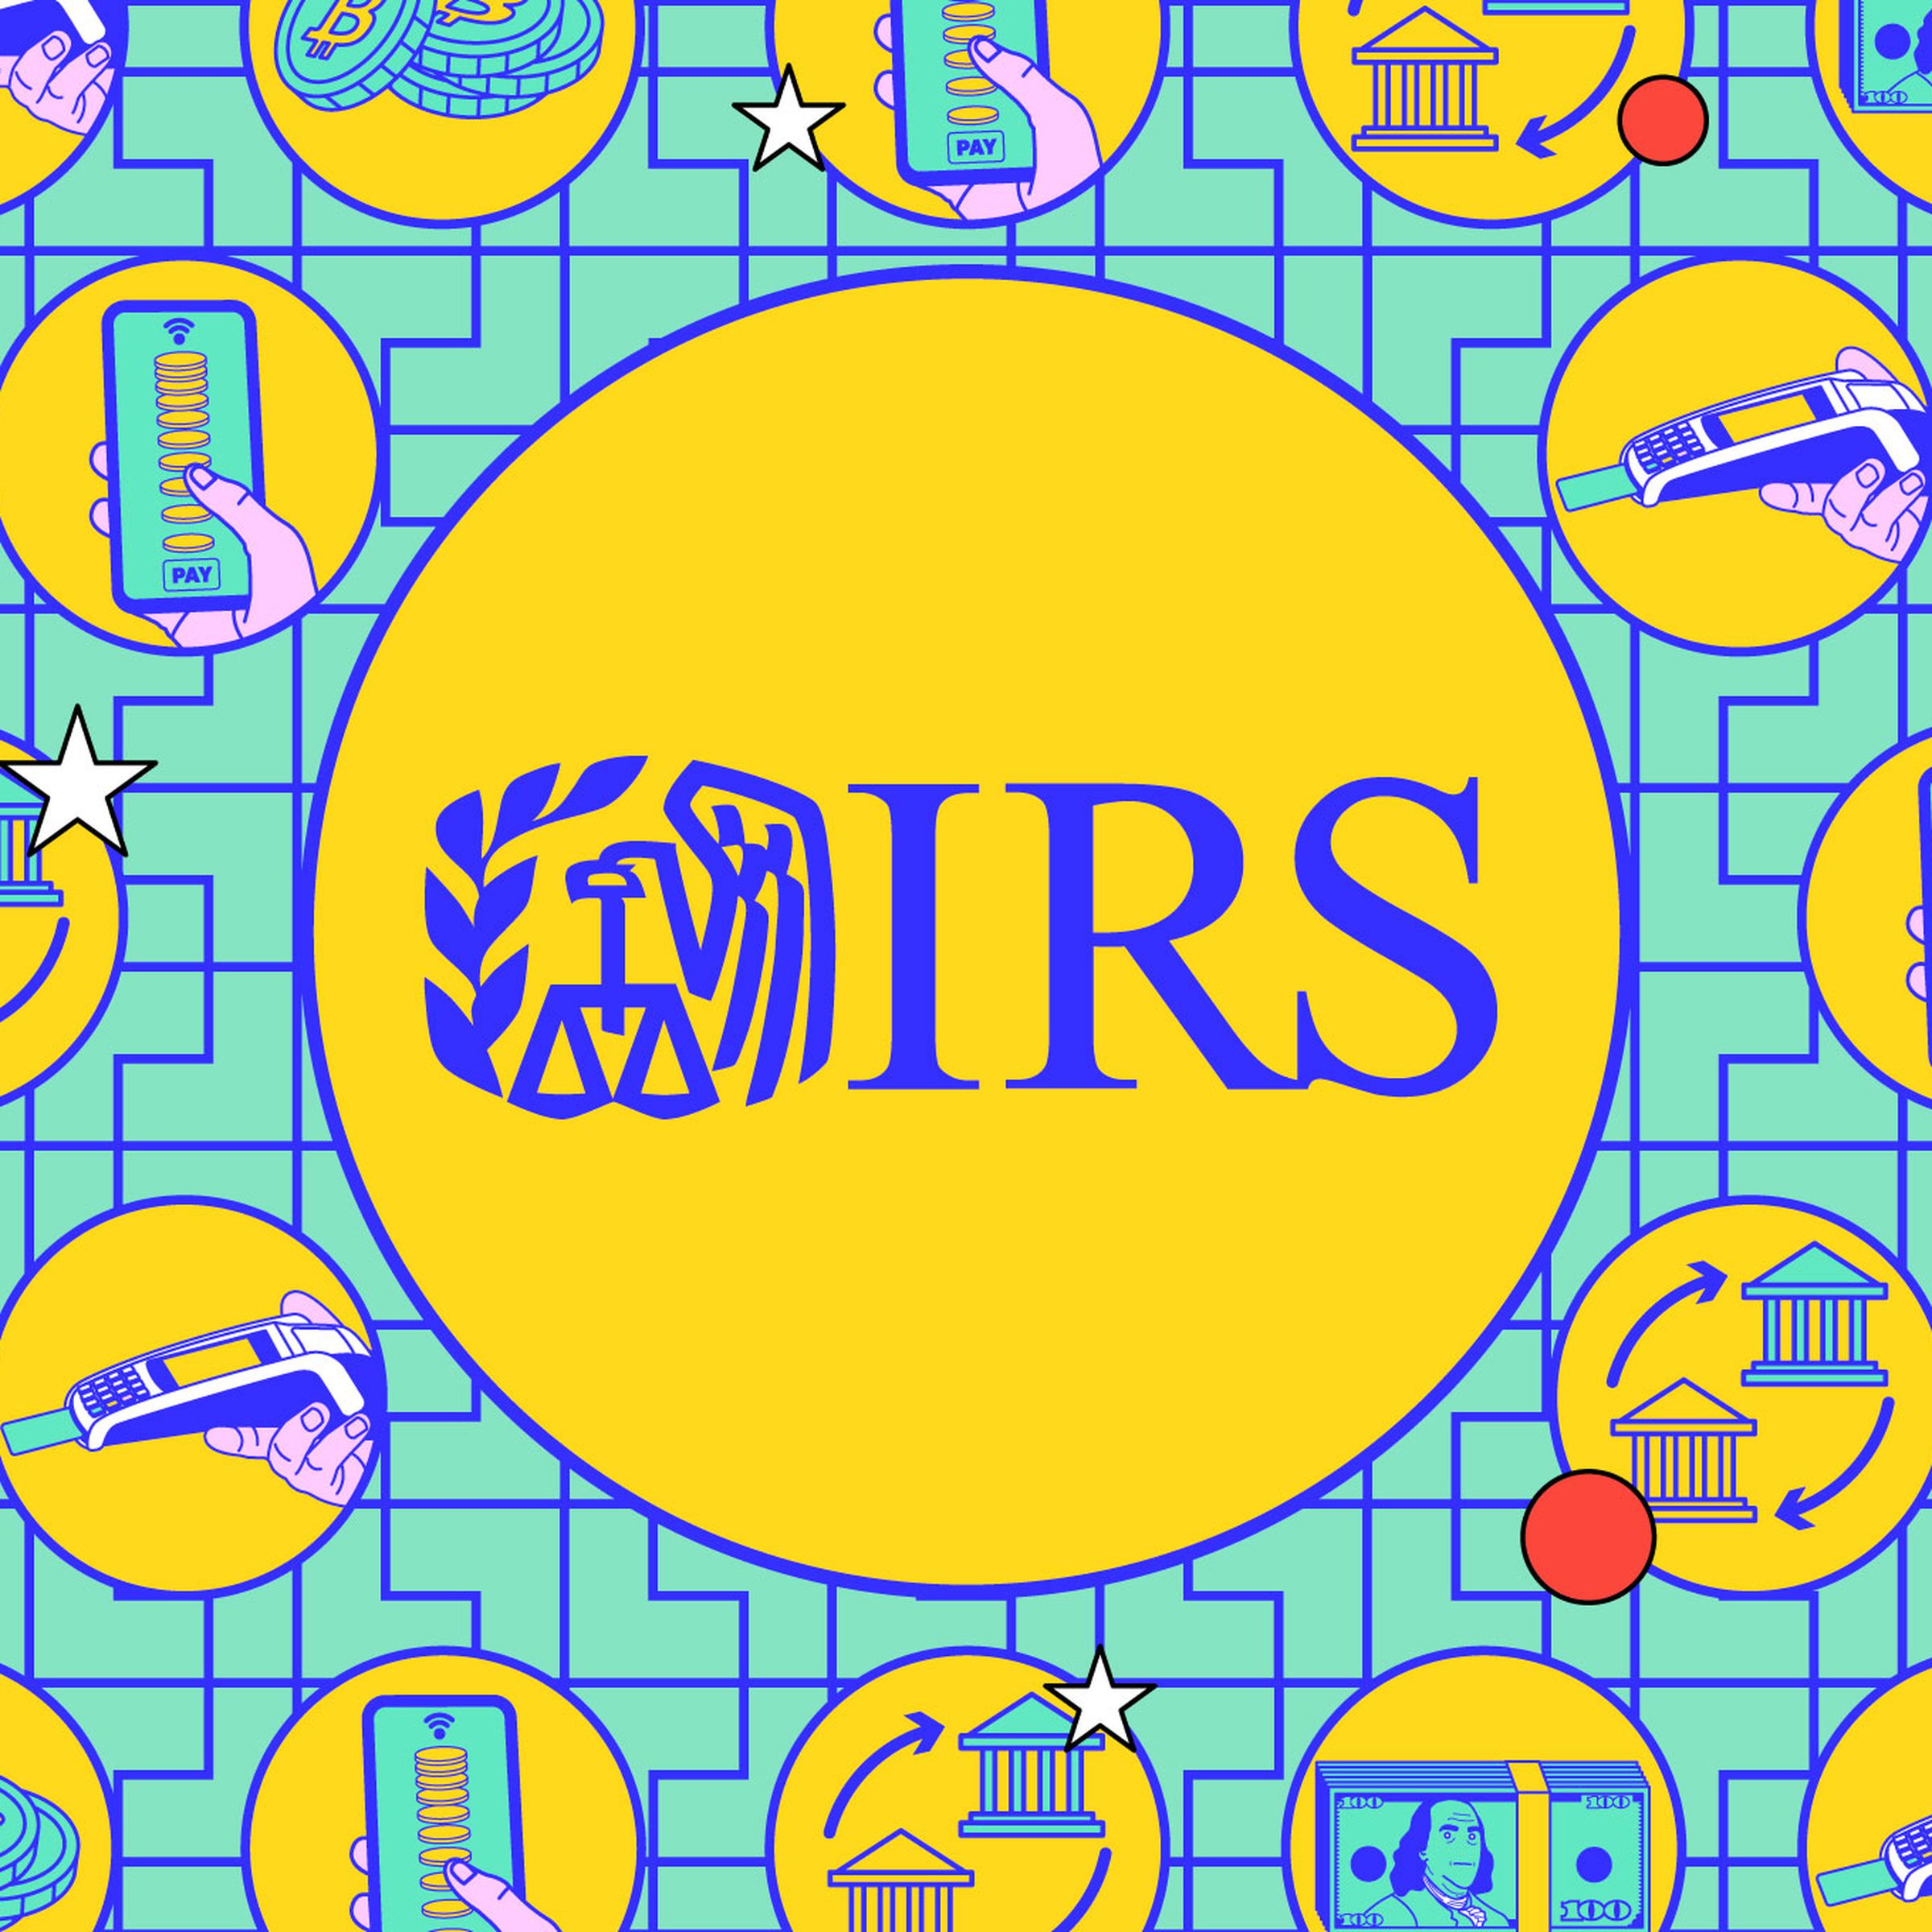 Colorful image of the IRS logo with several small images surrounding of smartphones and financial-themed drawings.